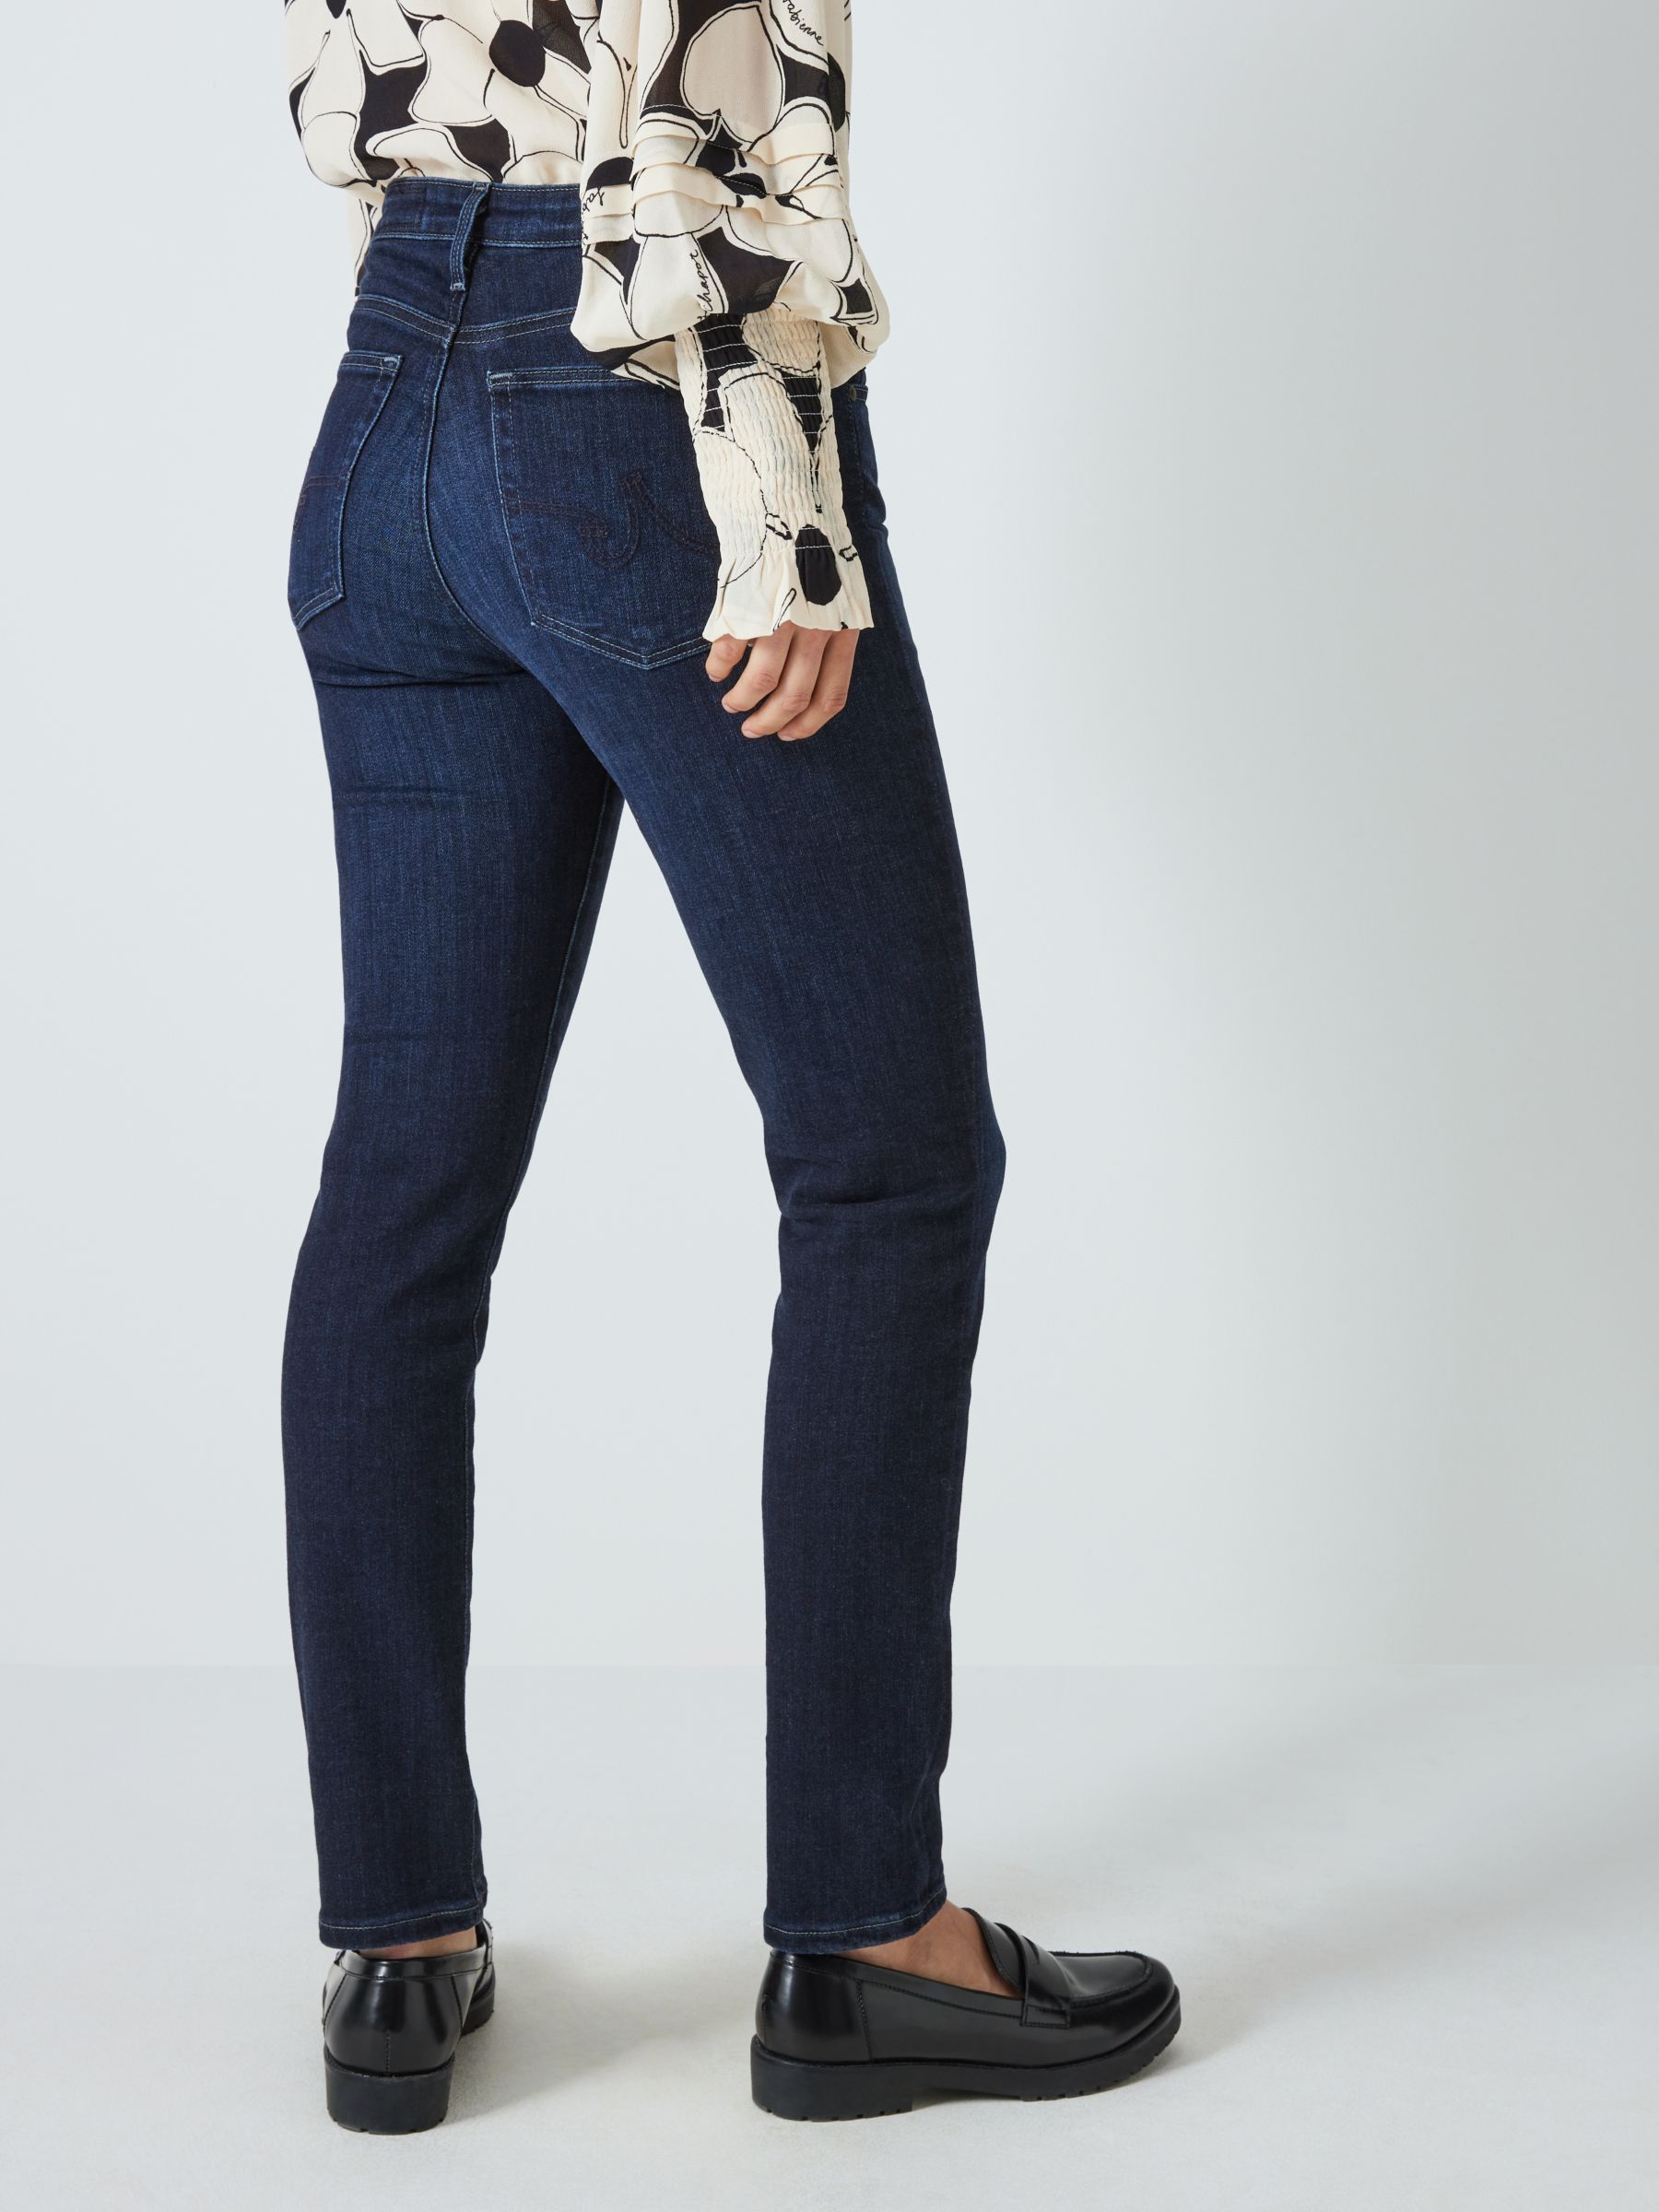 AG Prima Ankle Skinny Jeans, Concord at John Lewis & Partners